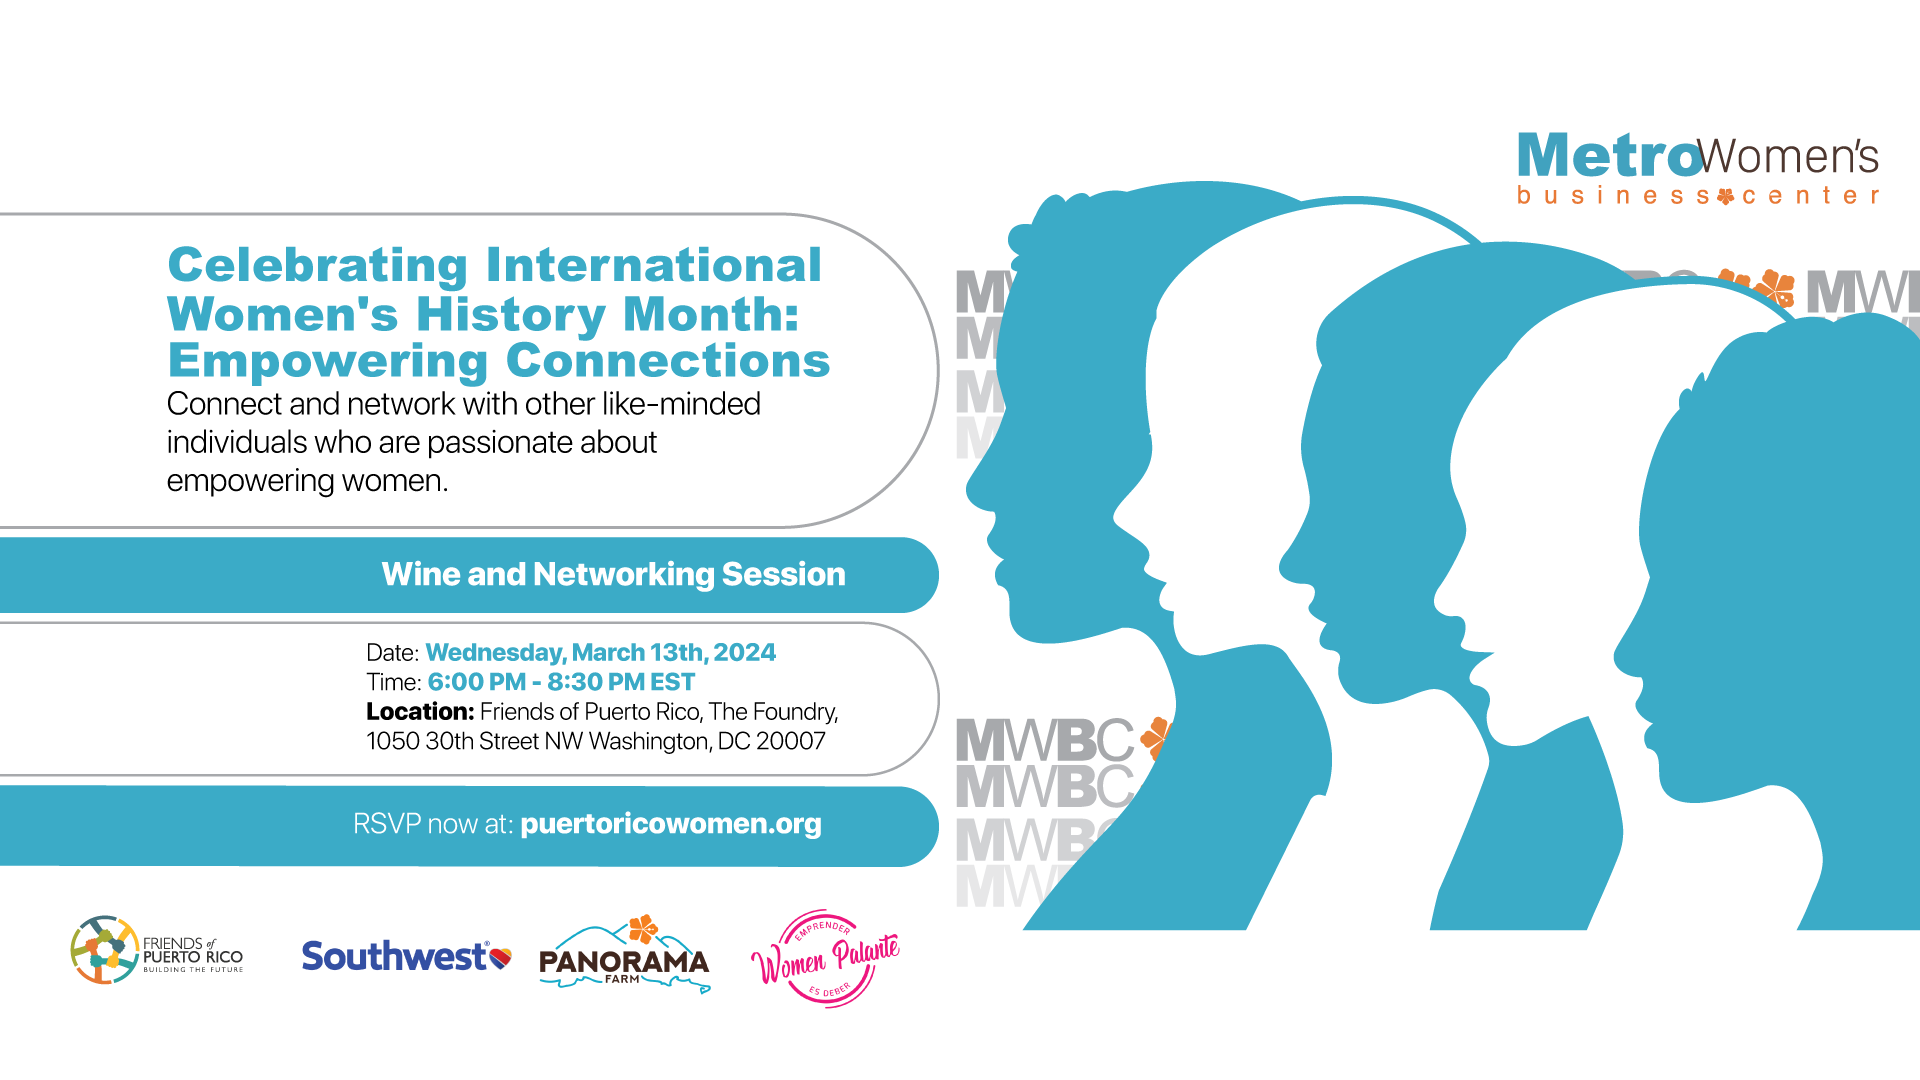 Celebrating International Women's History Month: Empowering Connections event